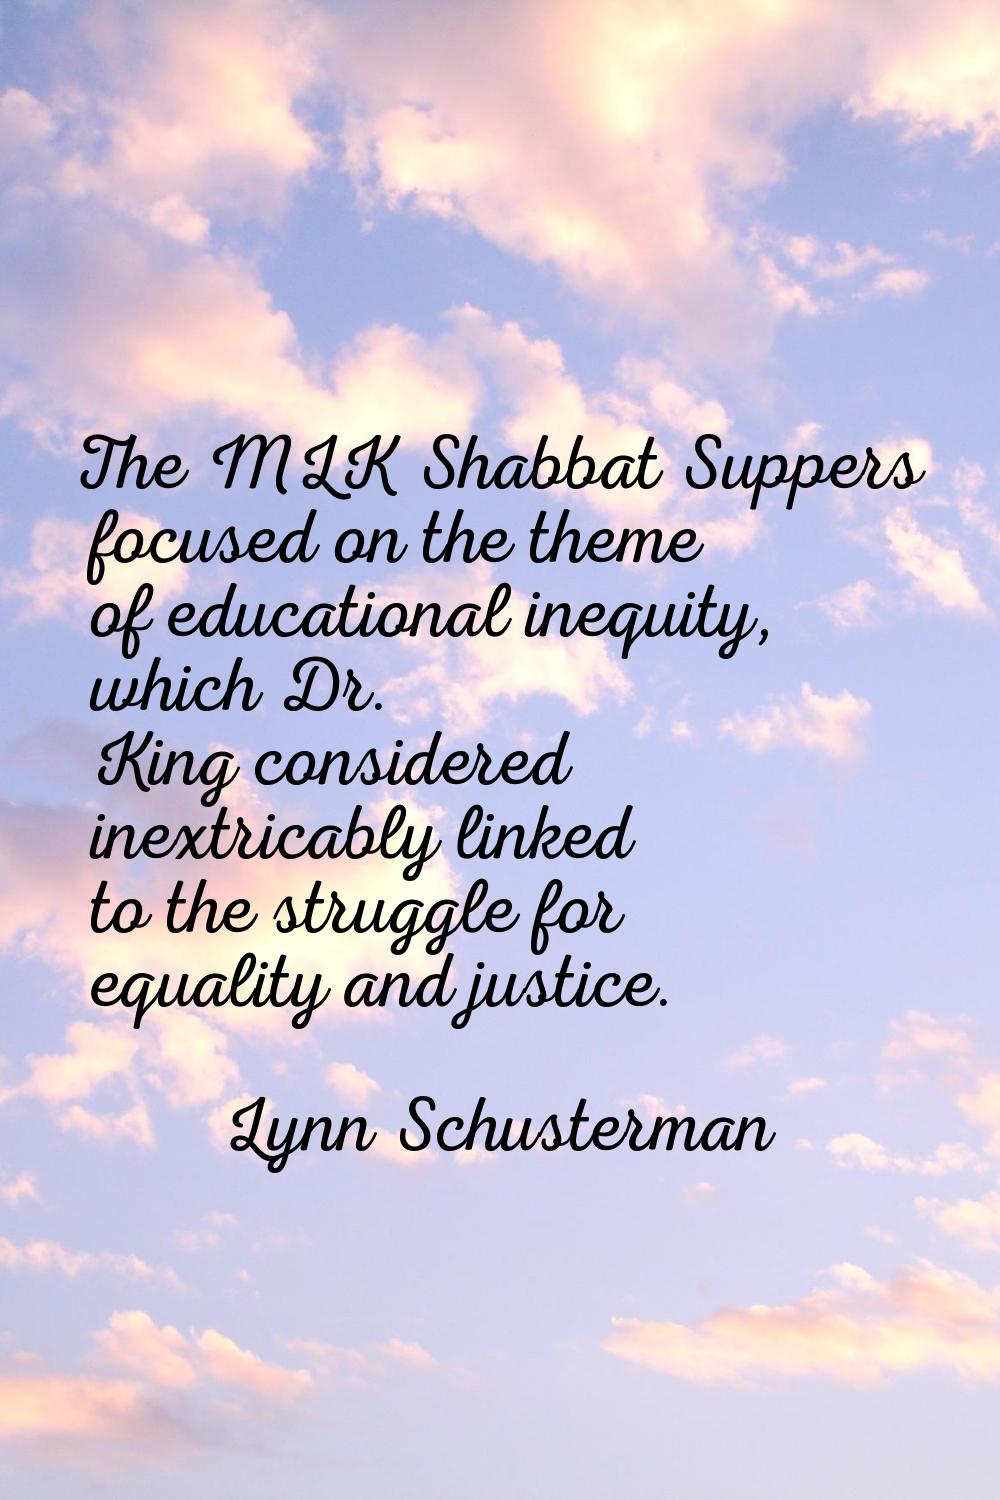 The MLK Shabbat Suppers focused on the theme of educational inequity, which Dr. King considered ine